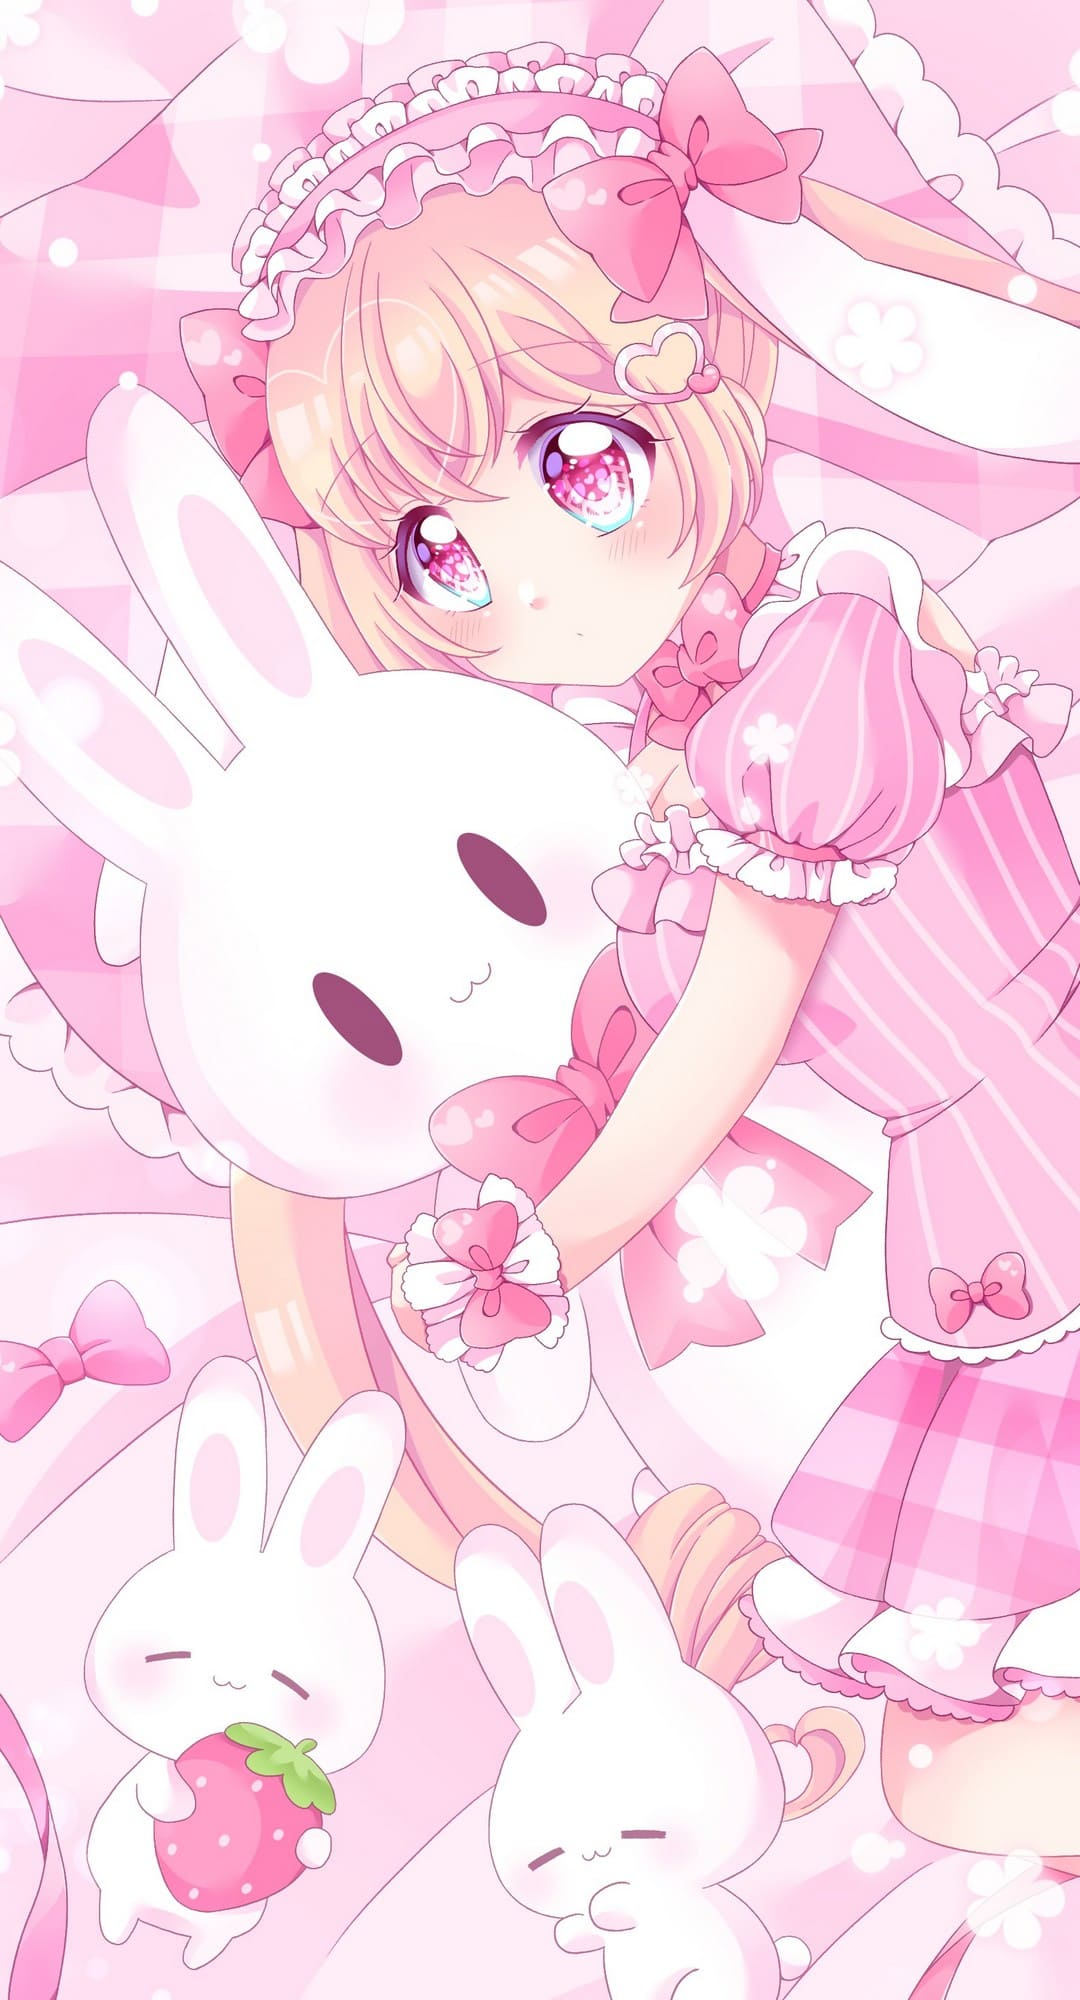 Anime wallpaper phone 1080x1920 for iPhone and Android - Pink anime